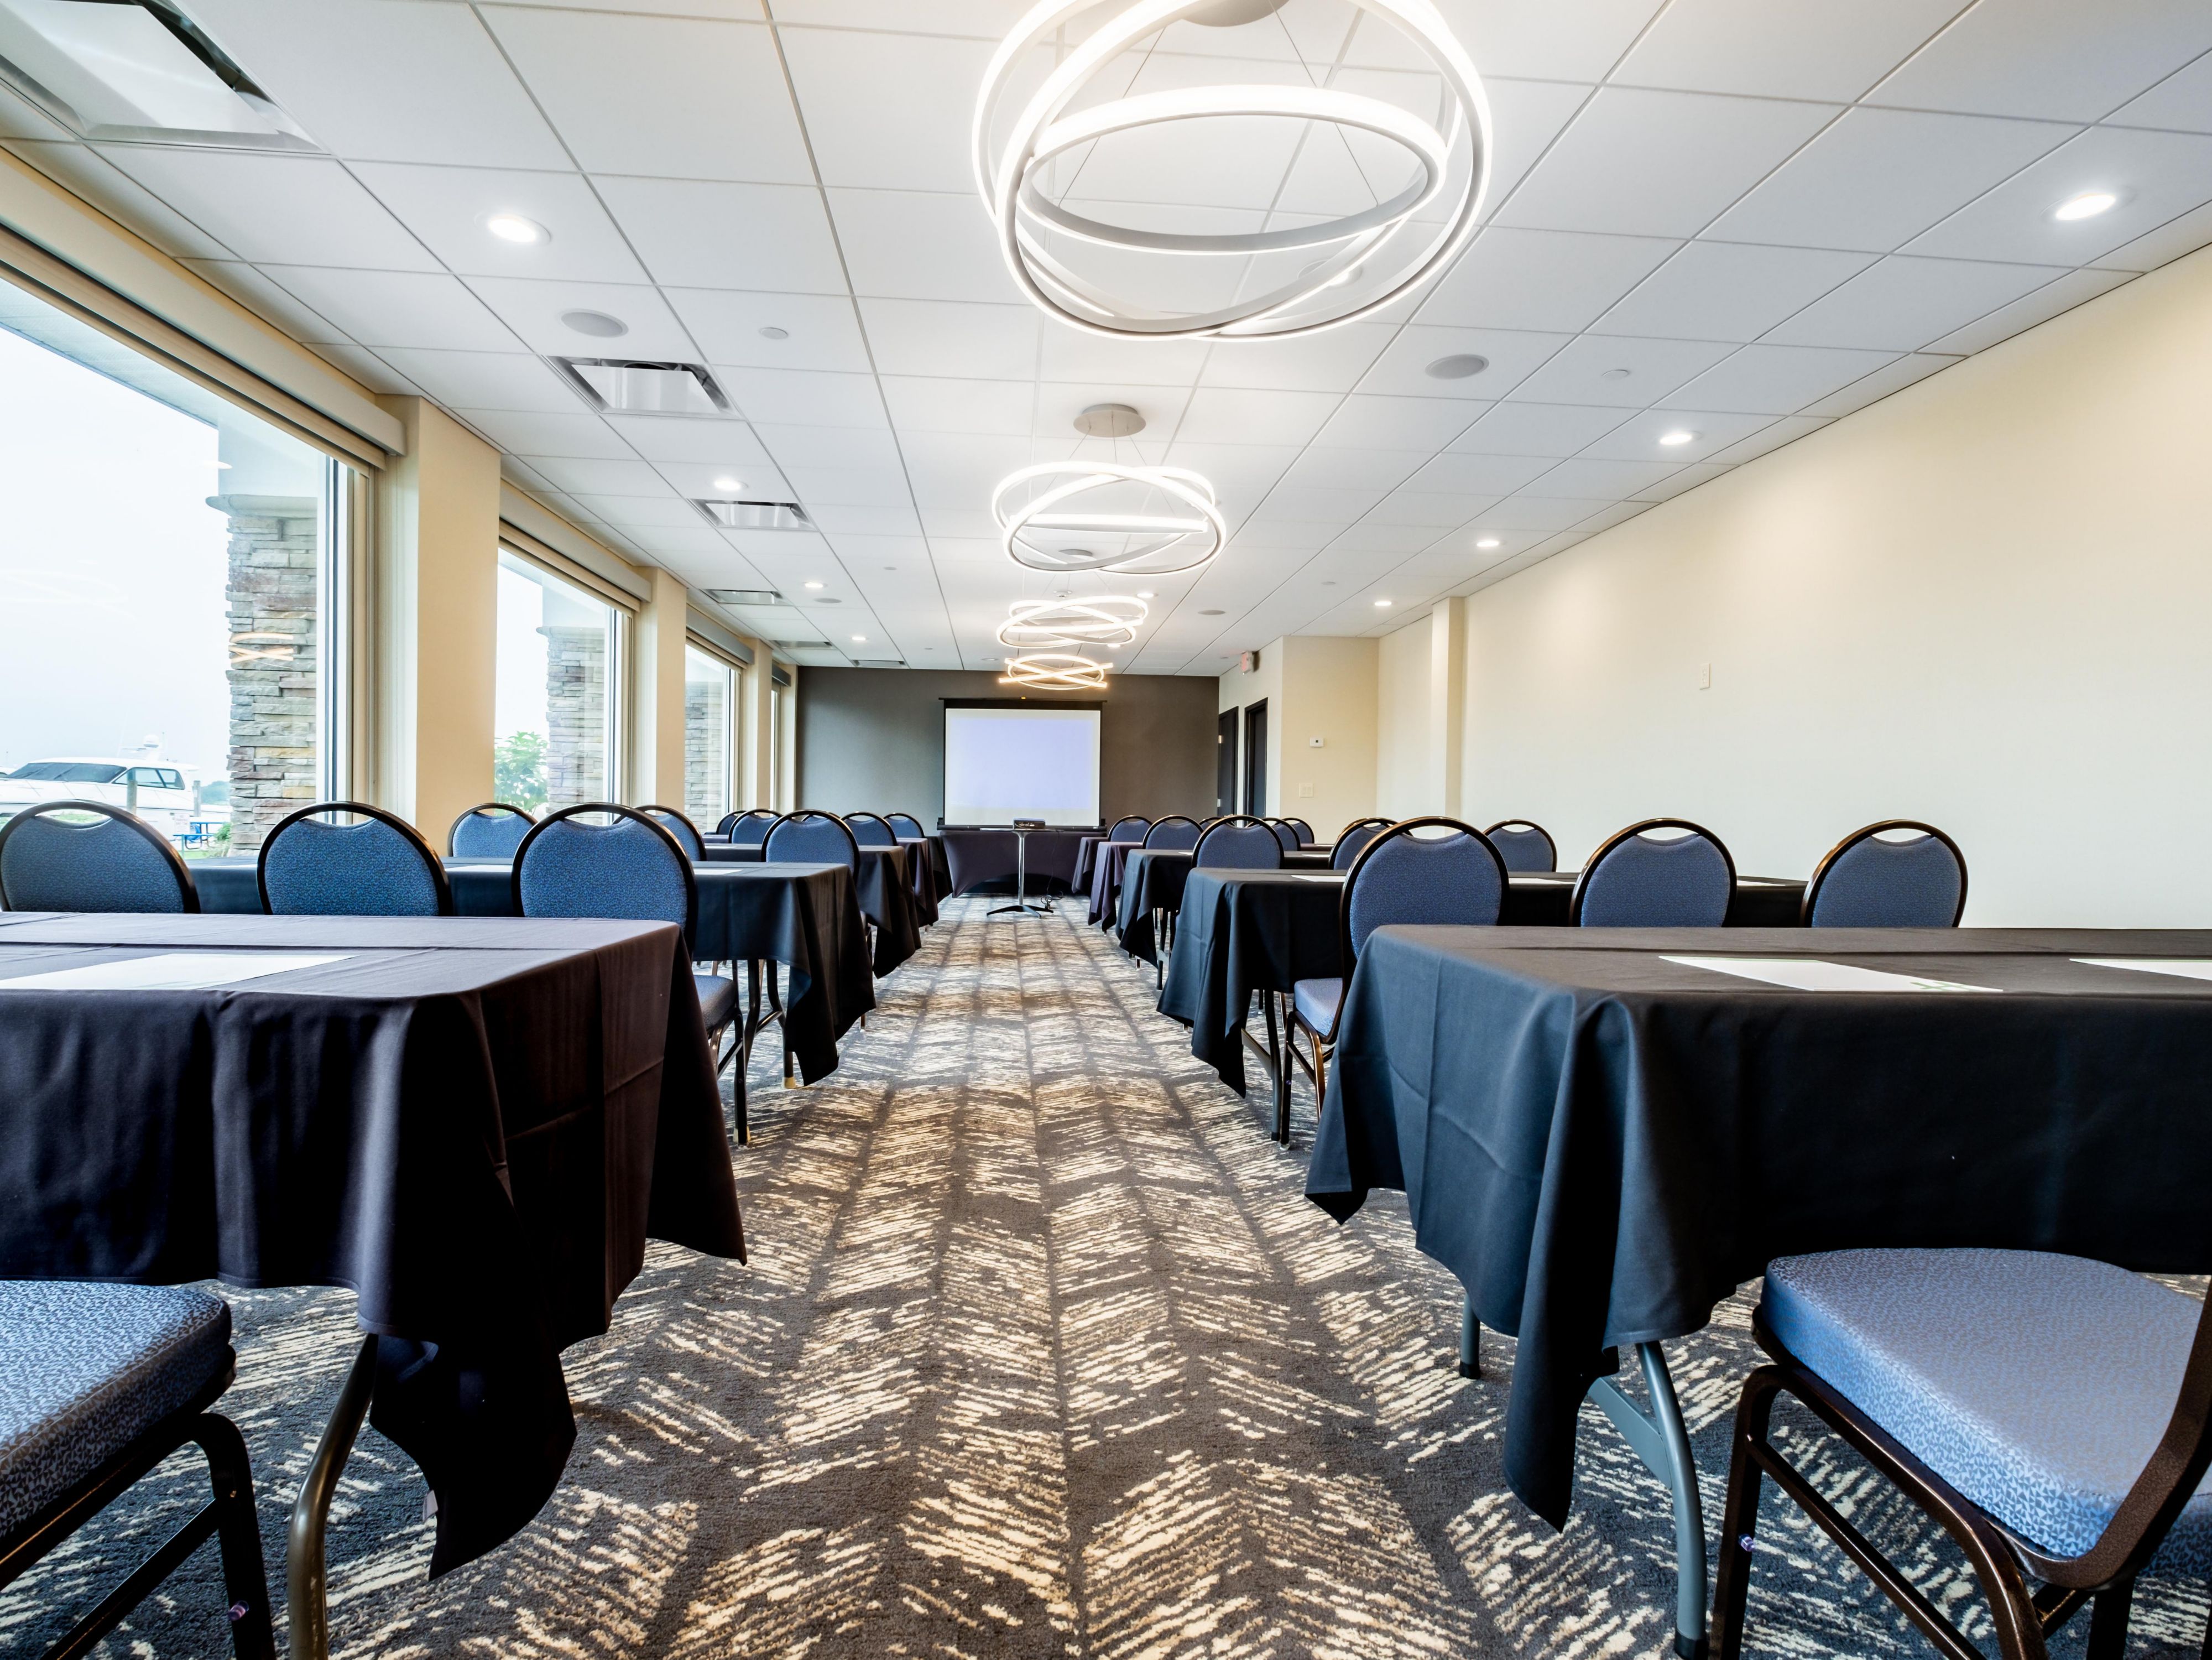 We take pride in our hospitality and strive to exceed guests' expectations. Whether you are planning a corporate meeting or a special event, we offer the perfect setting for your event with over 5,500 square feet of space. We also have an exceptional team to ensure success from the setup, food and execution.